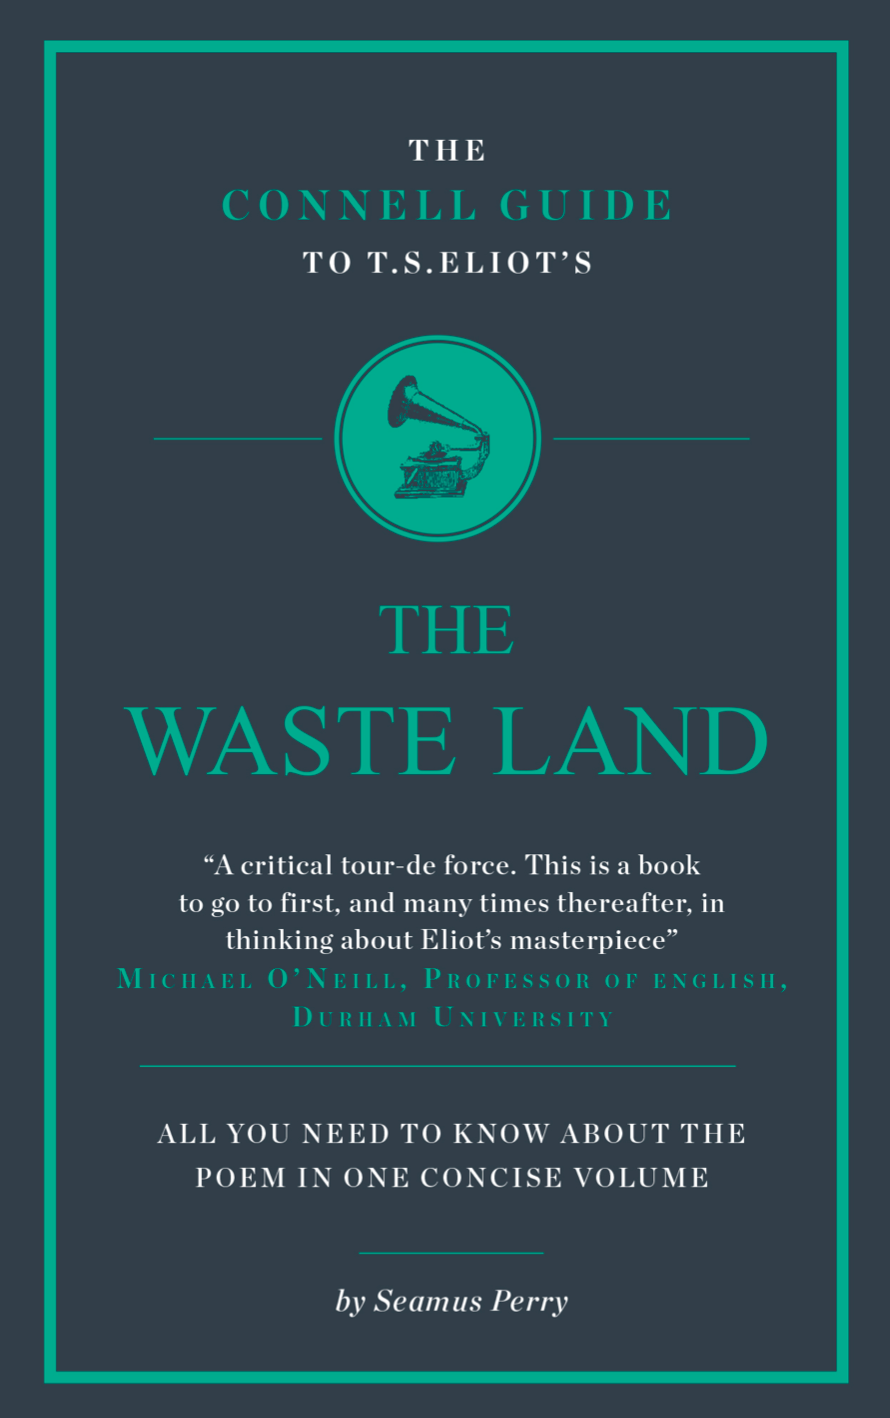 The Day x Connell Guides - The Connell Guide to T.S Eliot's The Wasteland